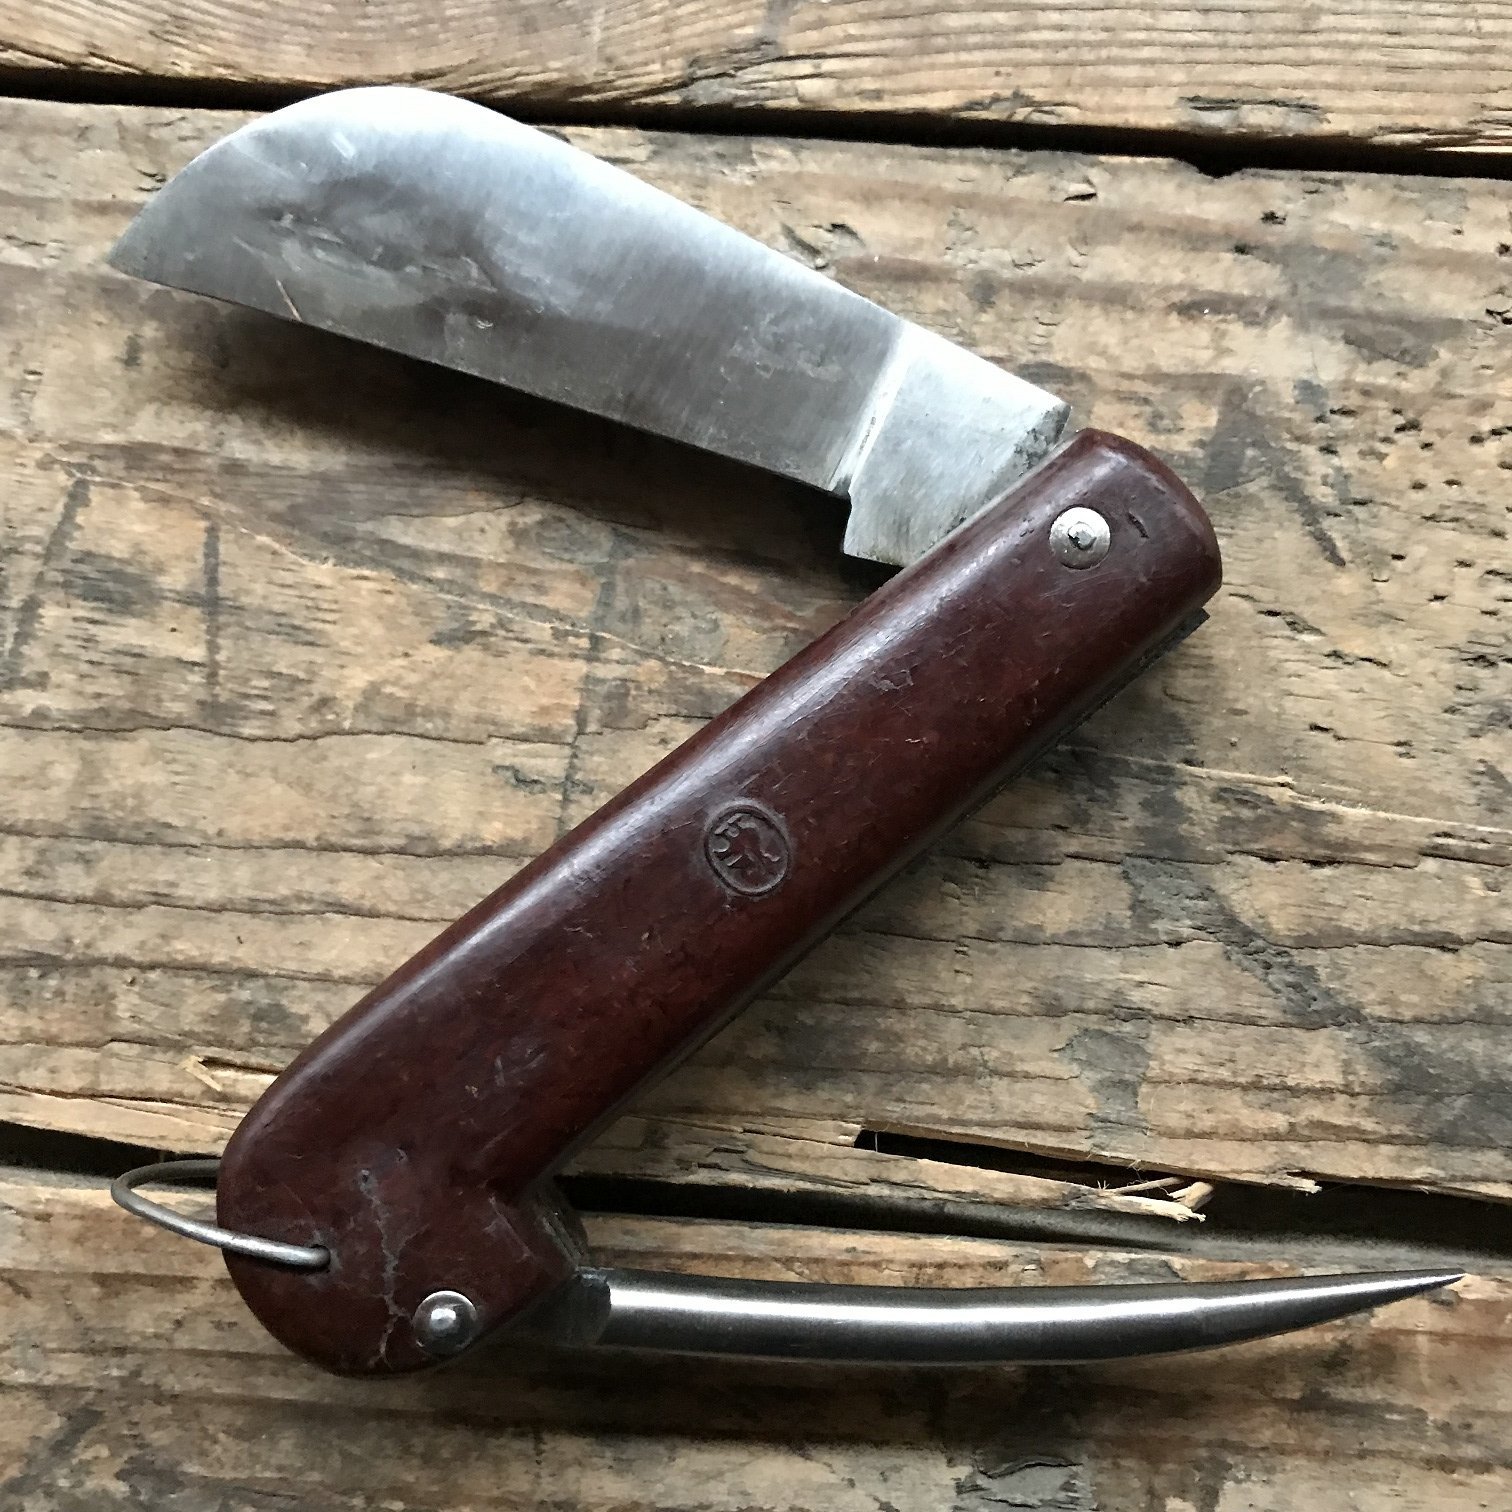 Soldier's knife. A few words and some photos - Knife, Army, Tools, Story, Longpost